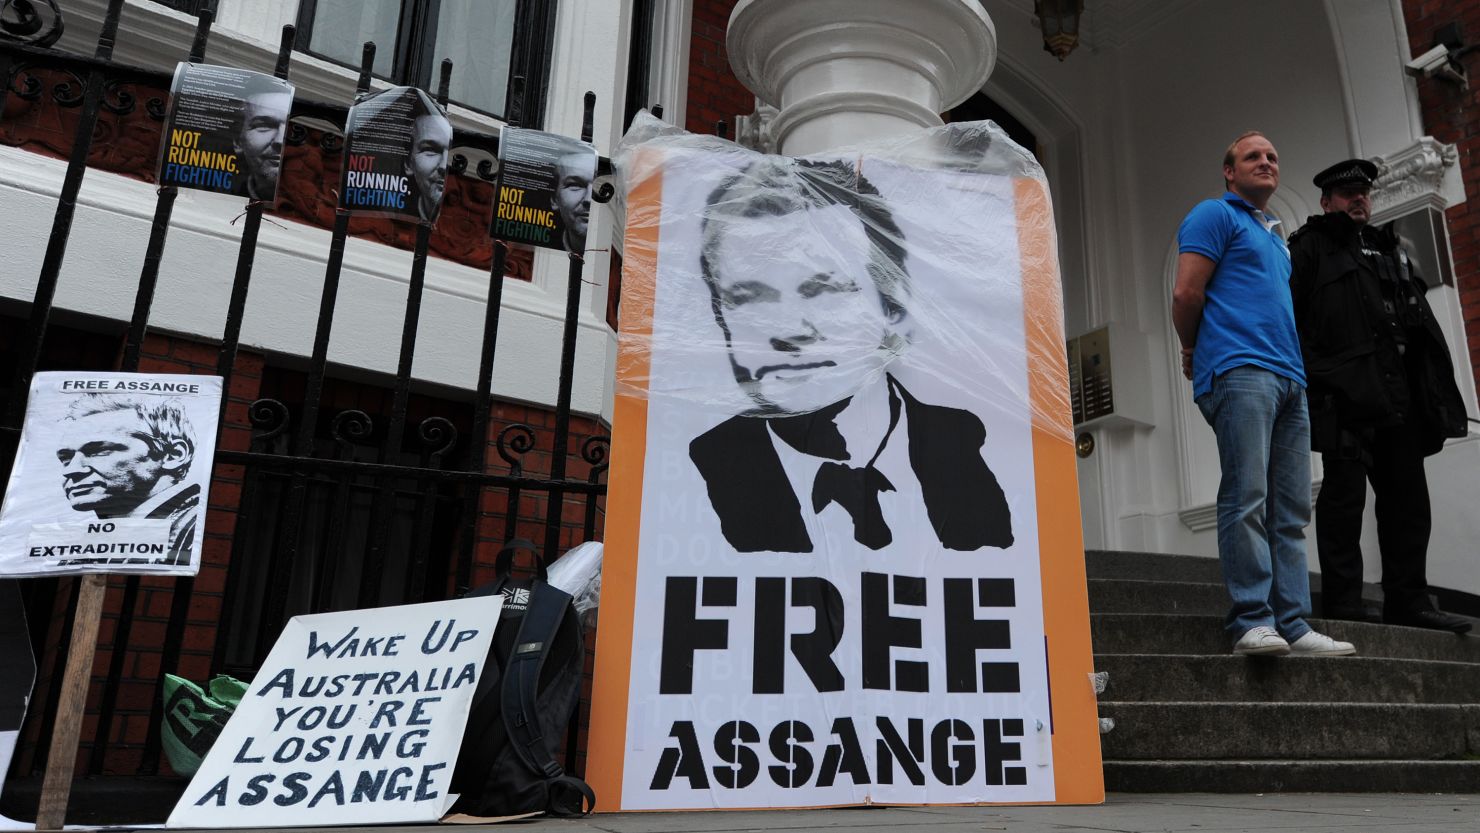 WikiLeaks founder Julian Assange has been holed up in the Ecuadorian Embassy in London since last month.